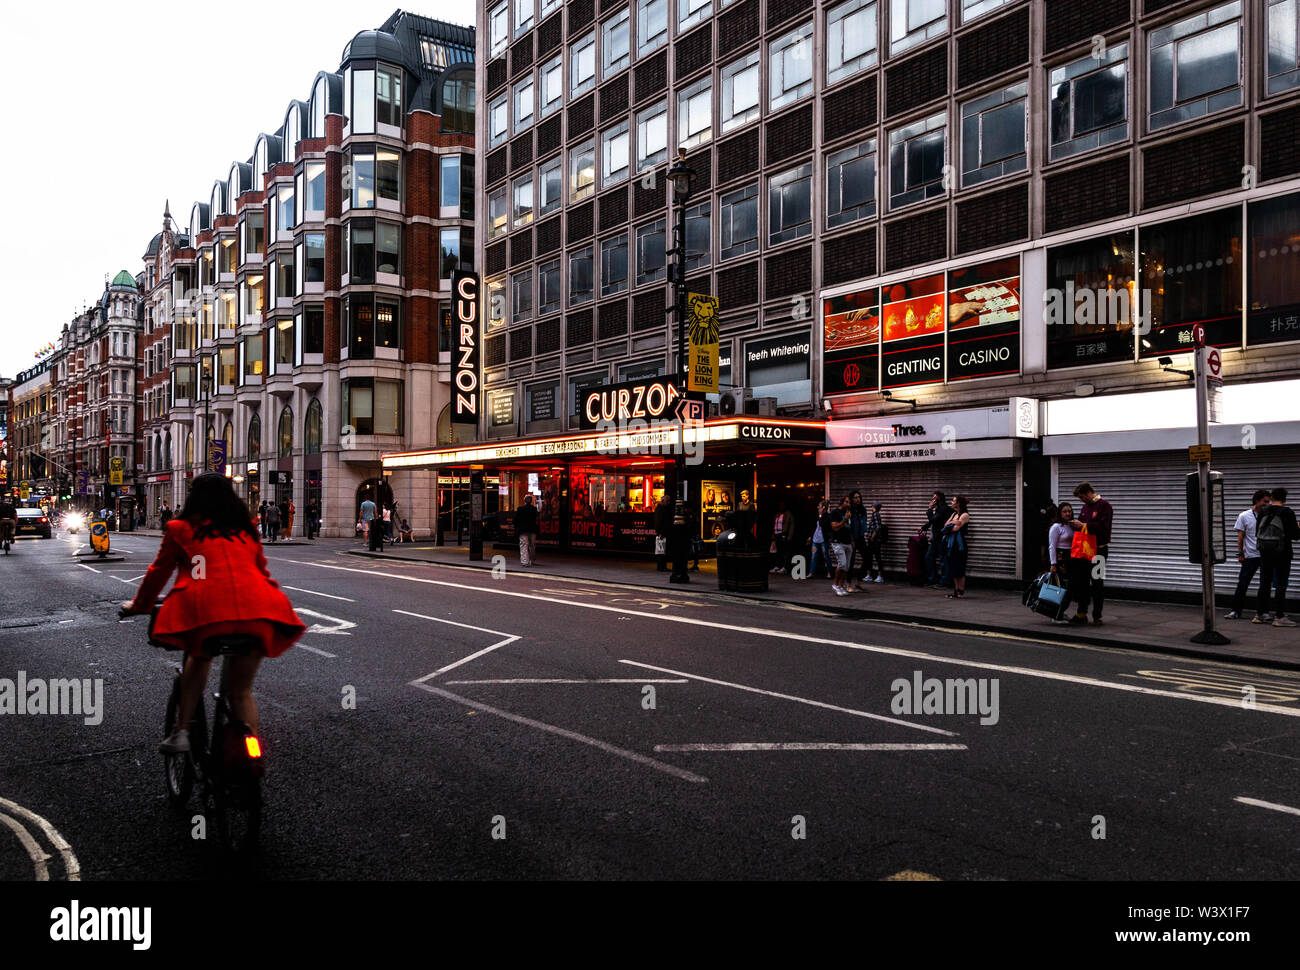 Shaftesbury Avenue, The West End theatre district, City of Westminster, W1, England, UK. Stock Photo